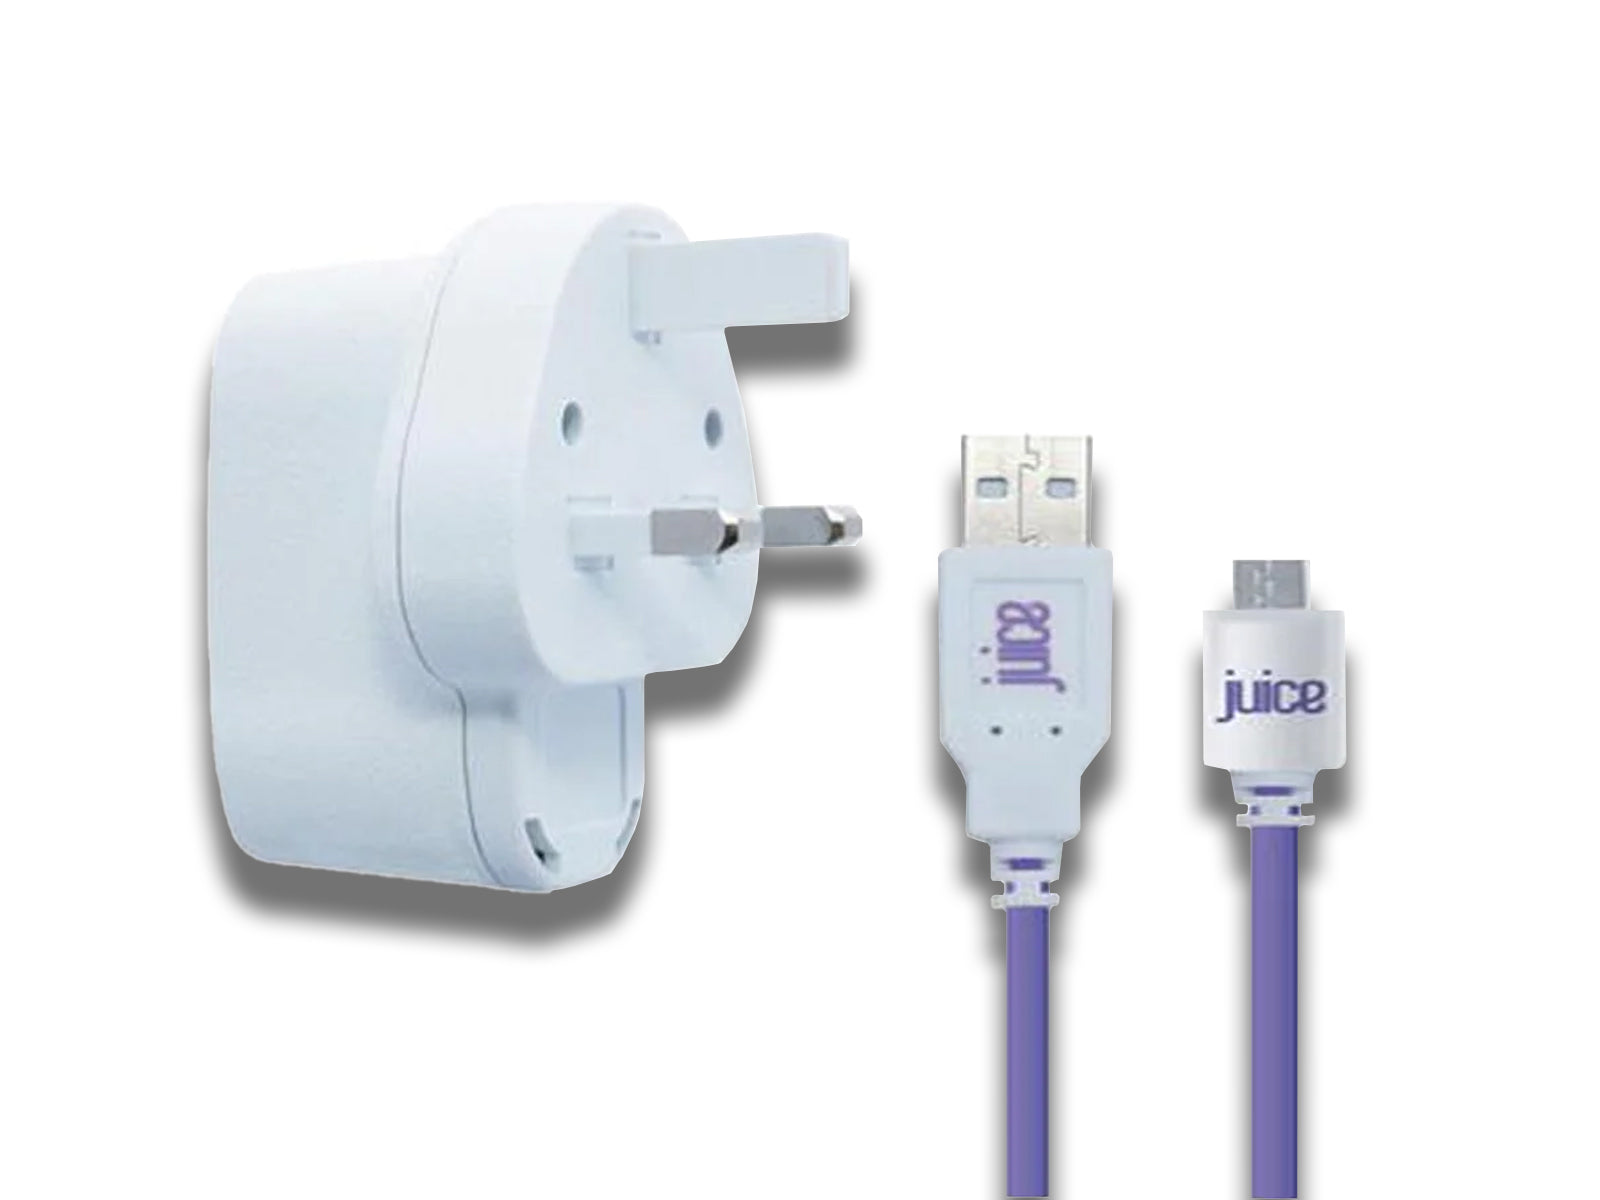 Image shows the Juice Micro USB Wall Charger with 1.5M Cable